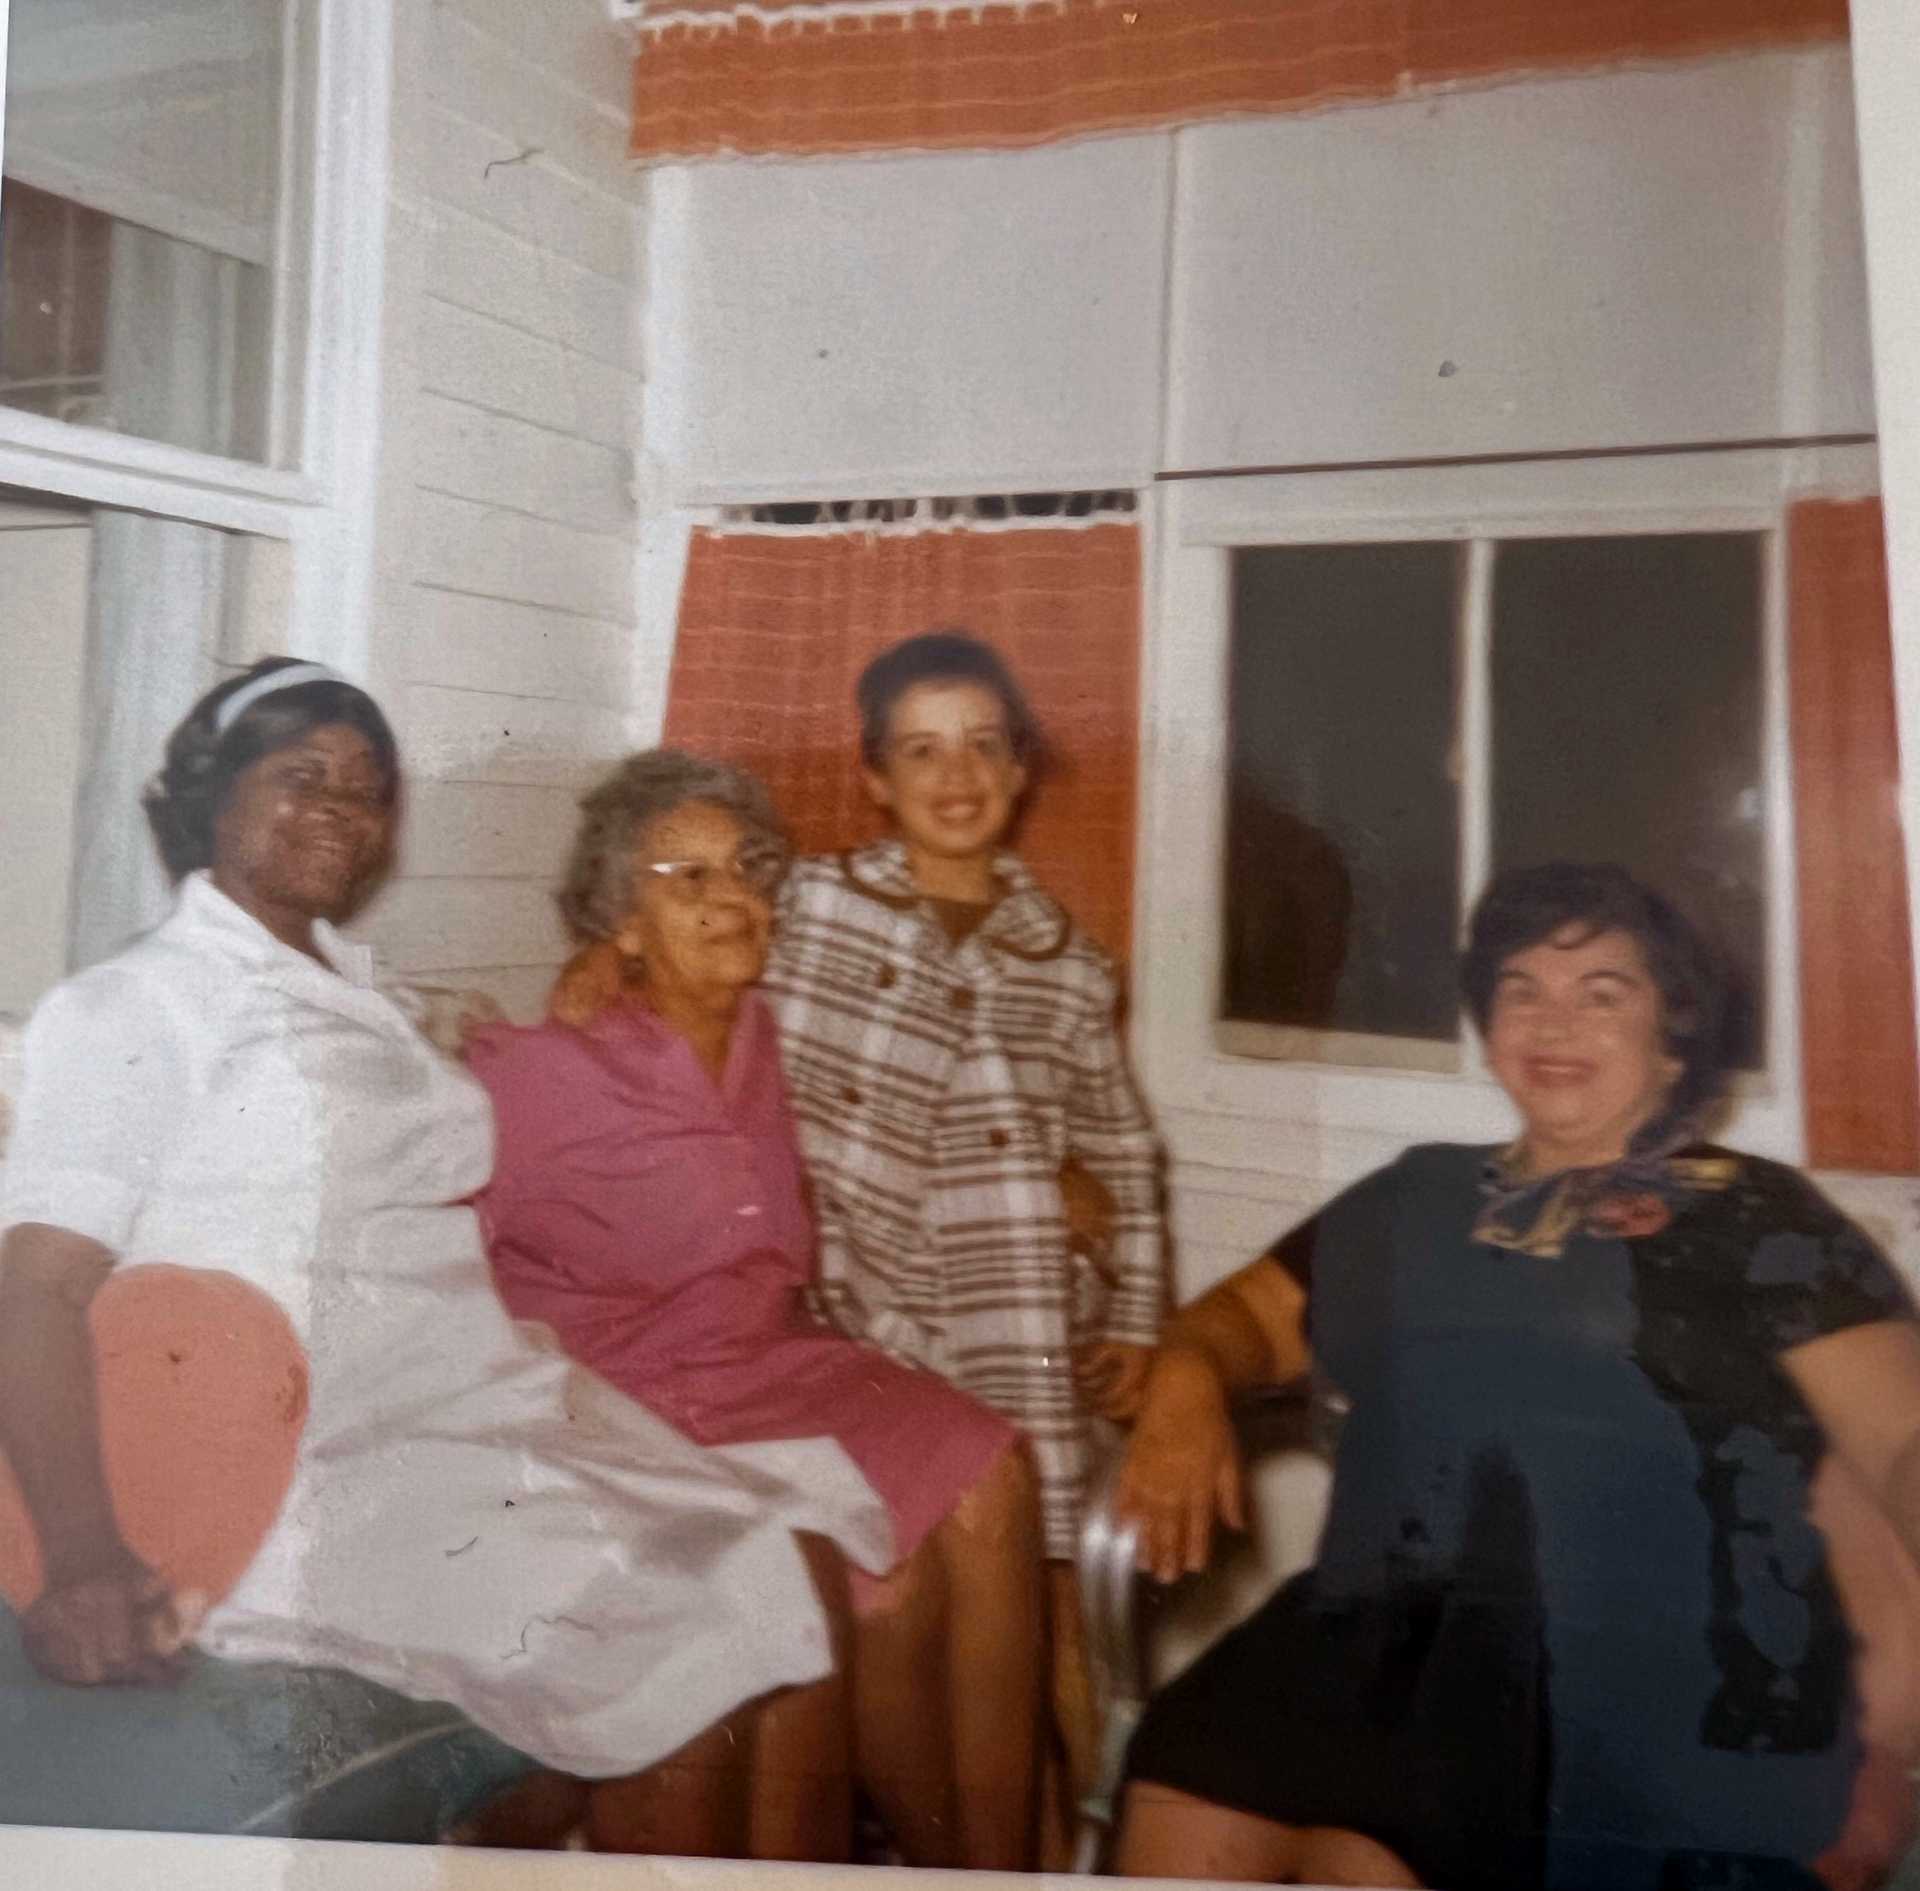 a photo of 4 women on a porch Cabrini and her mother